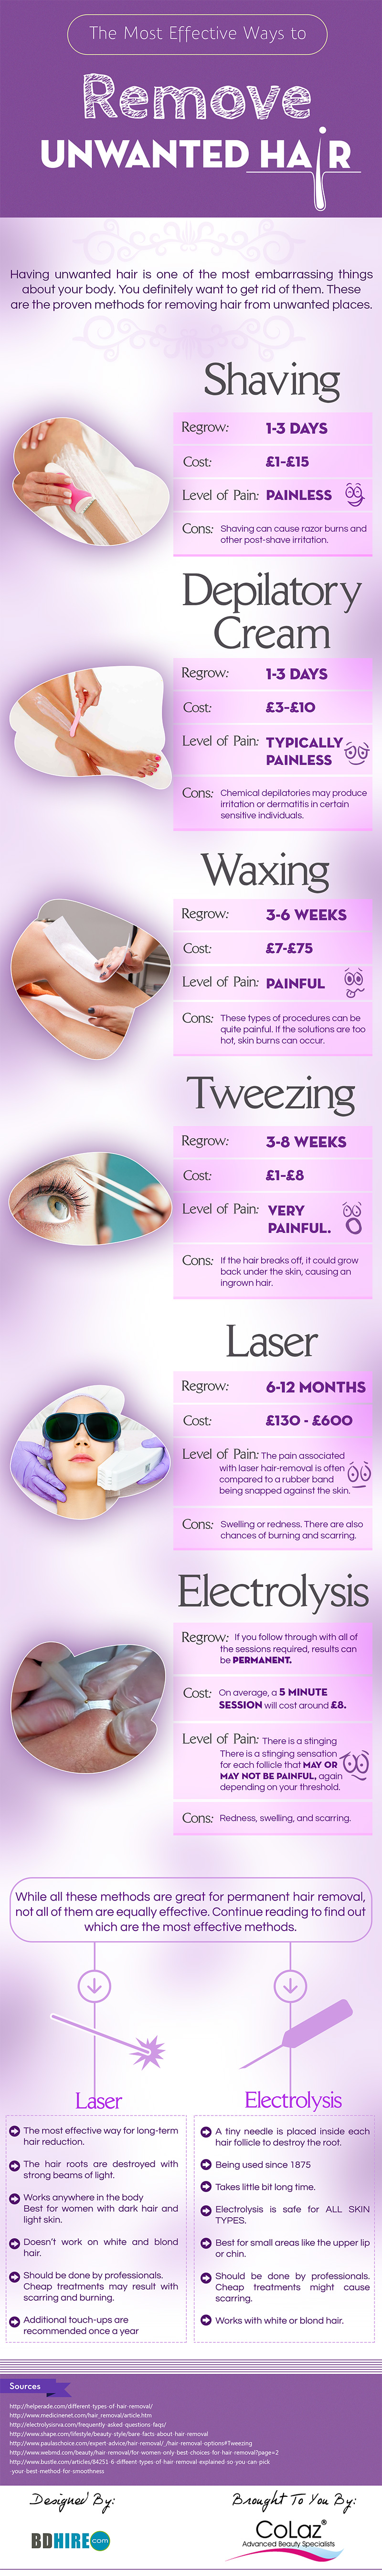 The Most Effective Way To Remove Unwanted Hair Infographic